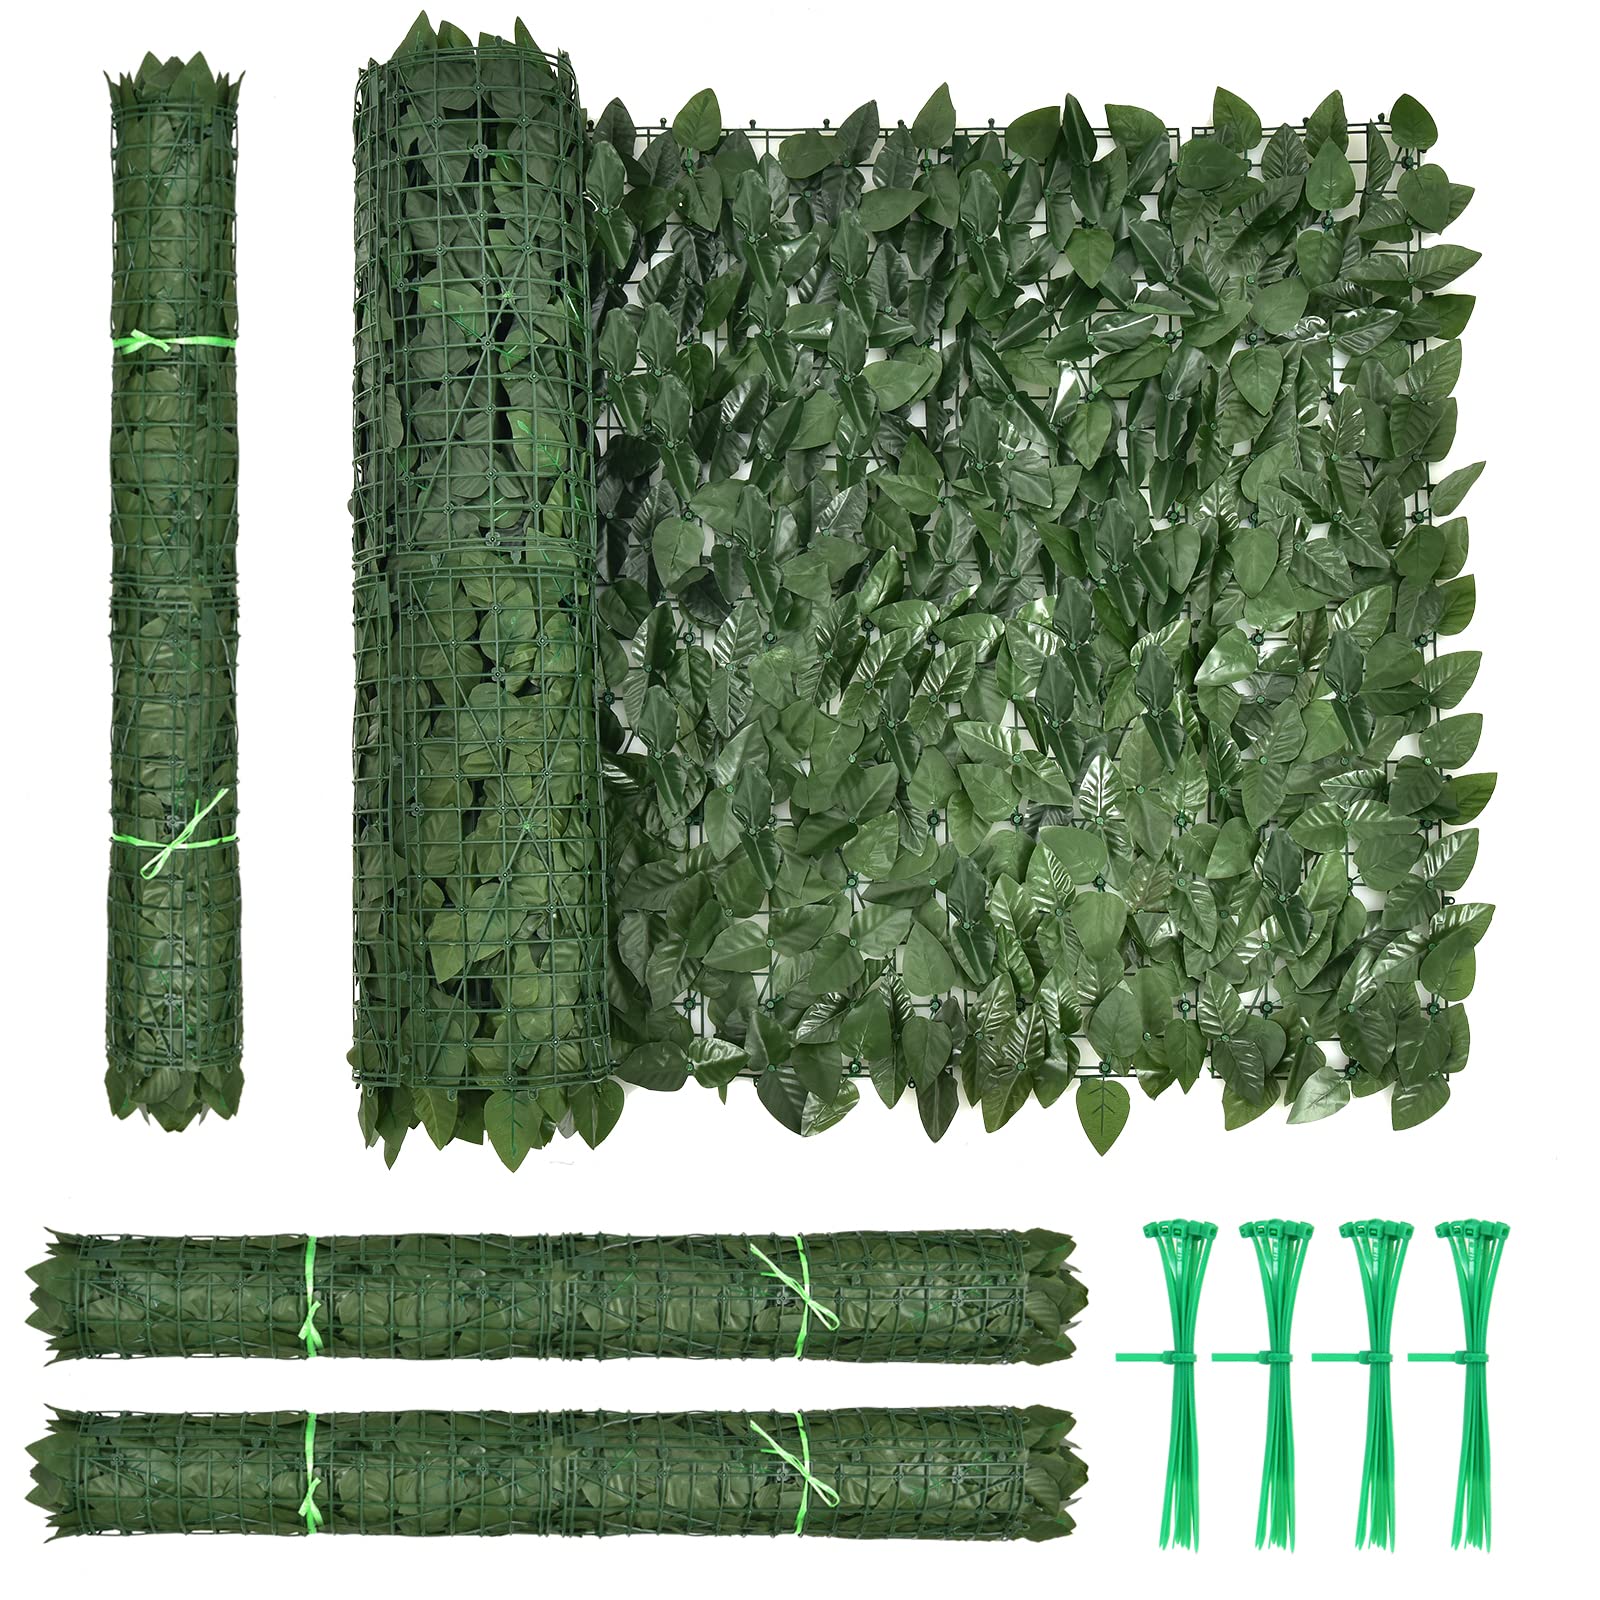 118" x 39.4" Artificial Ivy Privacy Fence Screen, Covering for Yard Garden Patio